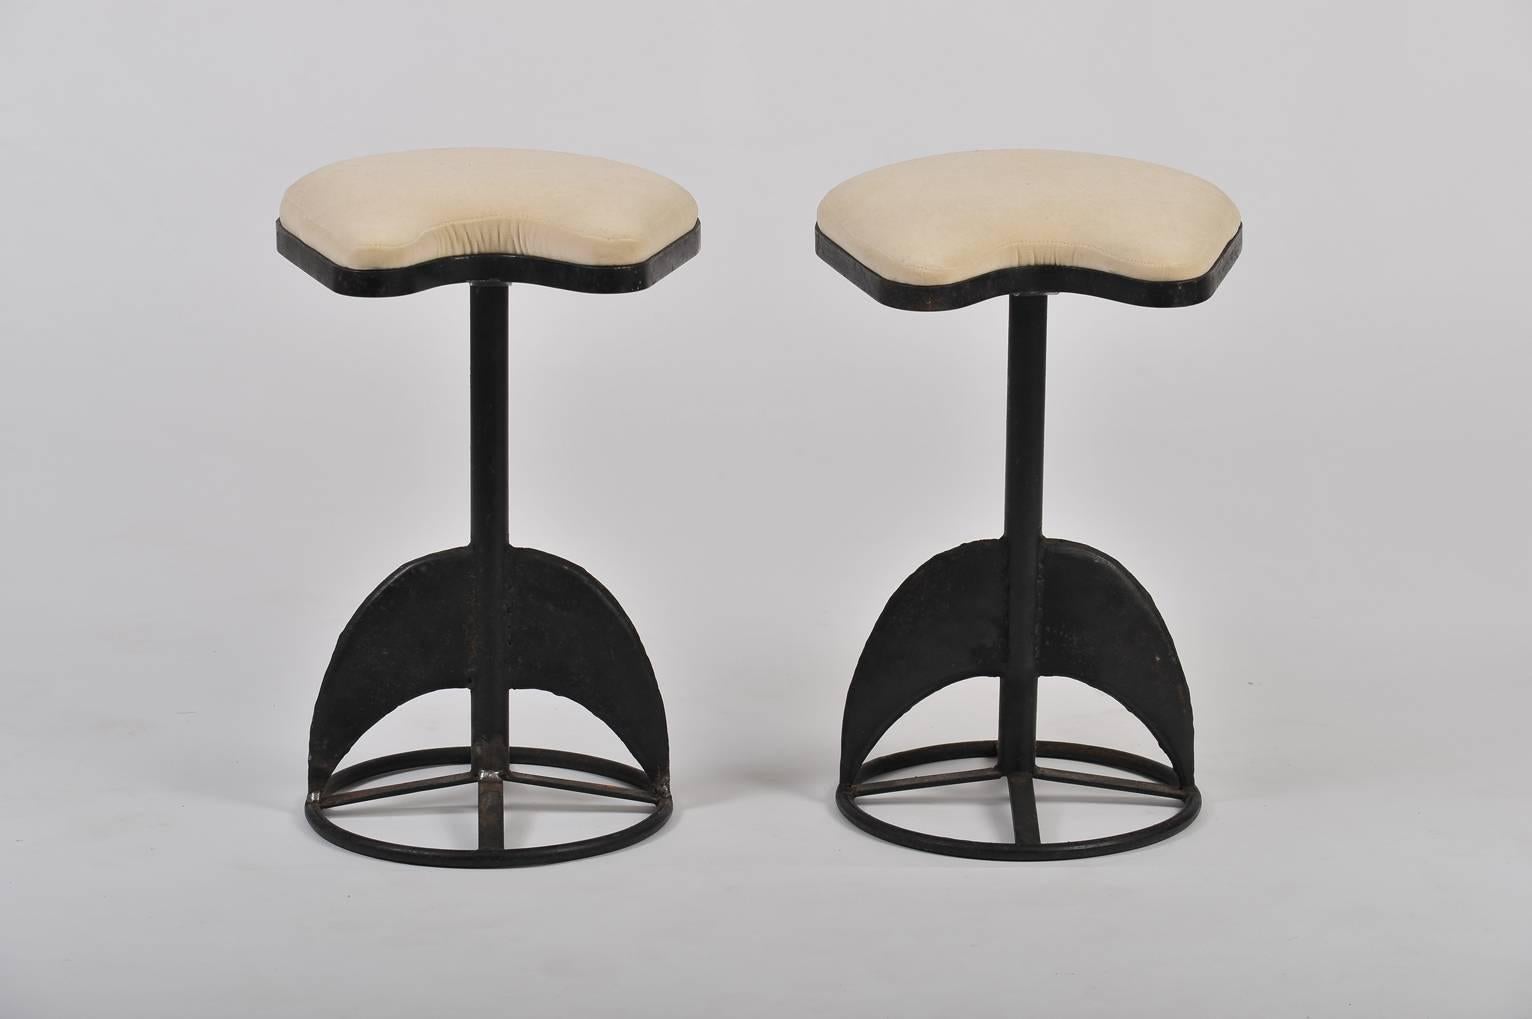 A pair of black patinated wrought iron sculptural stools, with most unusual horse shoe shaped seats. Newly upholstered in ivory velvet
Italy, circa 1950.